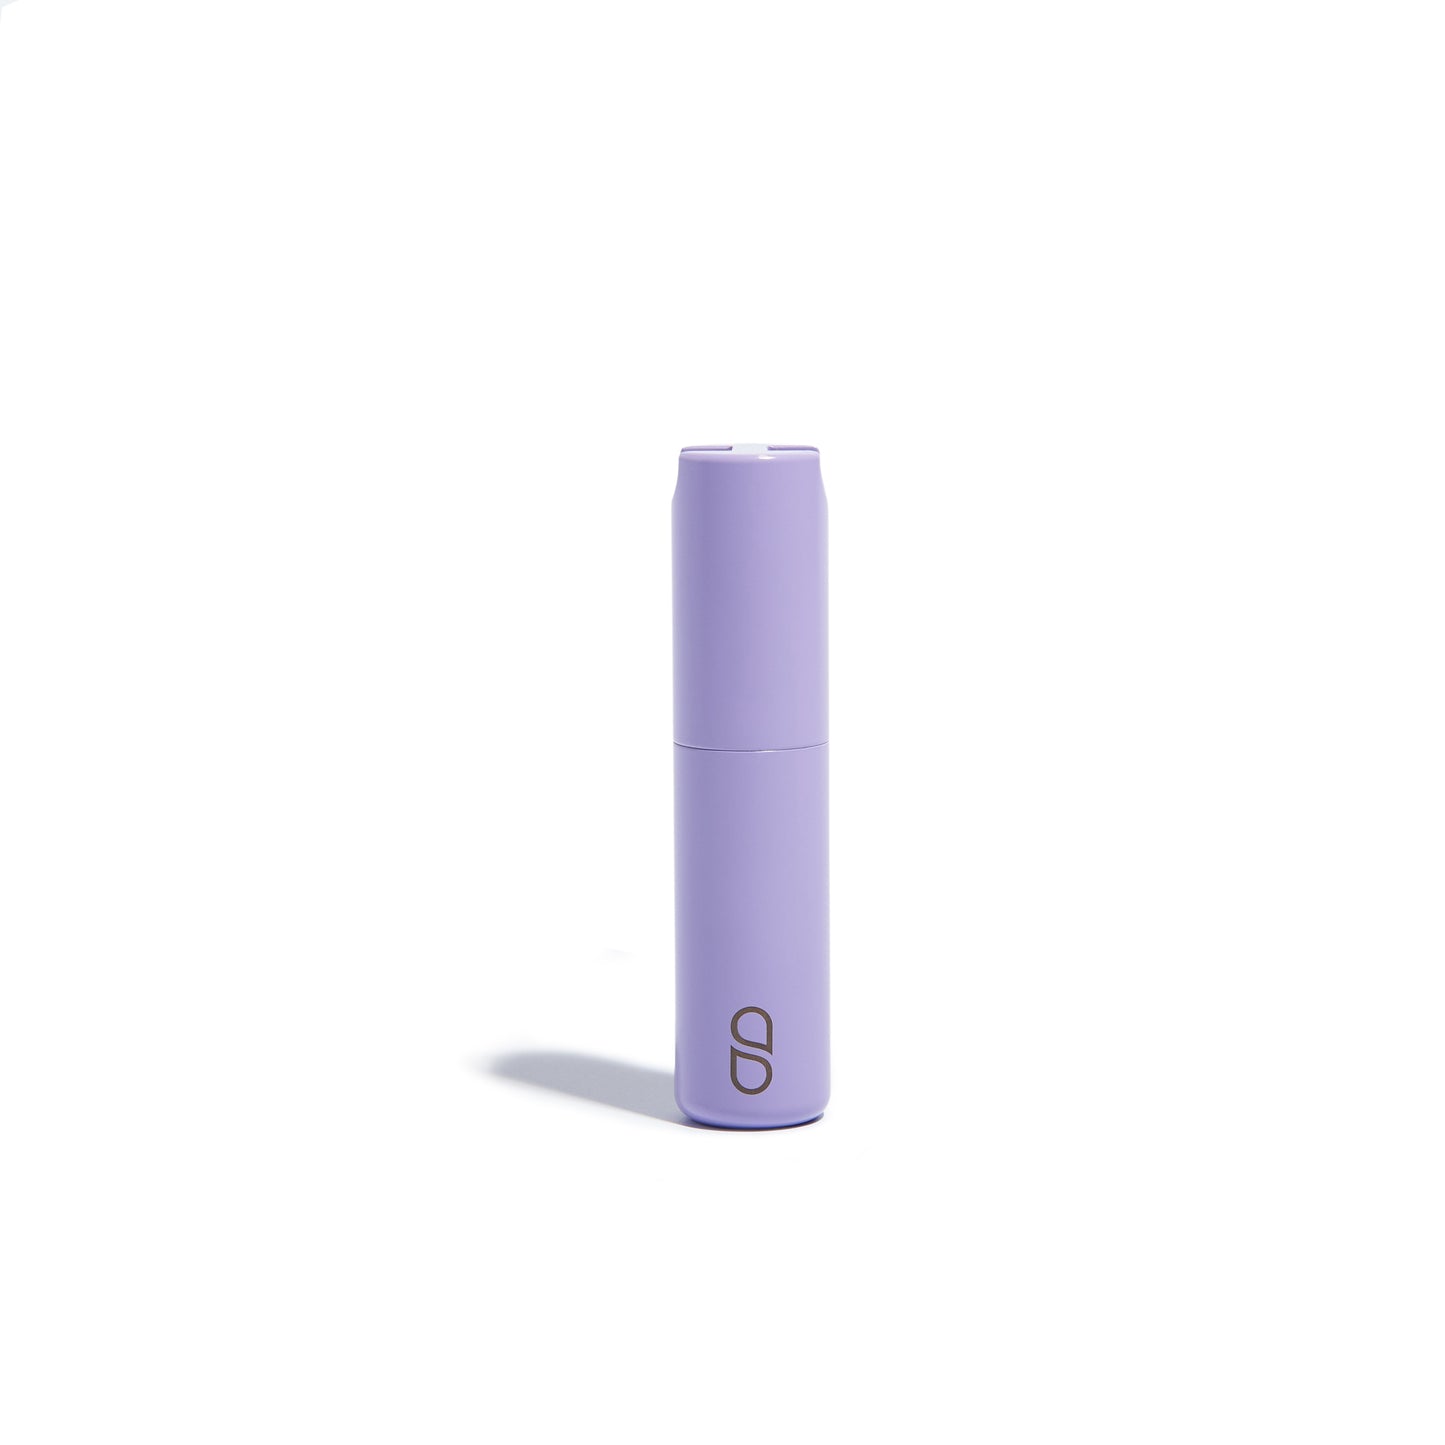 Bestseller, Lavender tabuu pill case, available from wearetabuu.com. Founded by Lucy Rout. At 7.5cm tall, the case fits up to six large tablets (e.g. Paracetamol). Waterproof, made from stainless steel, durable and stylish. The case will keep you going wherever your day takes you.